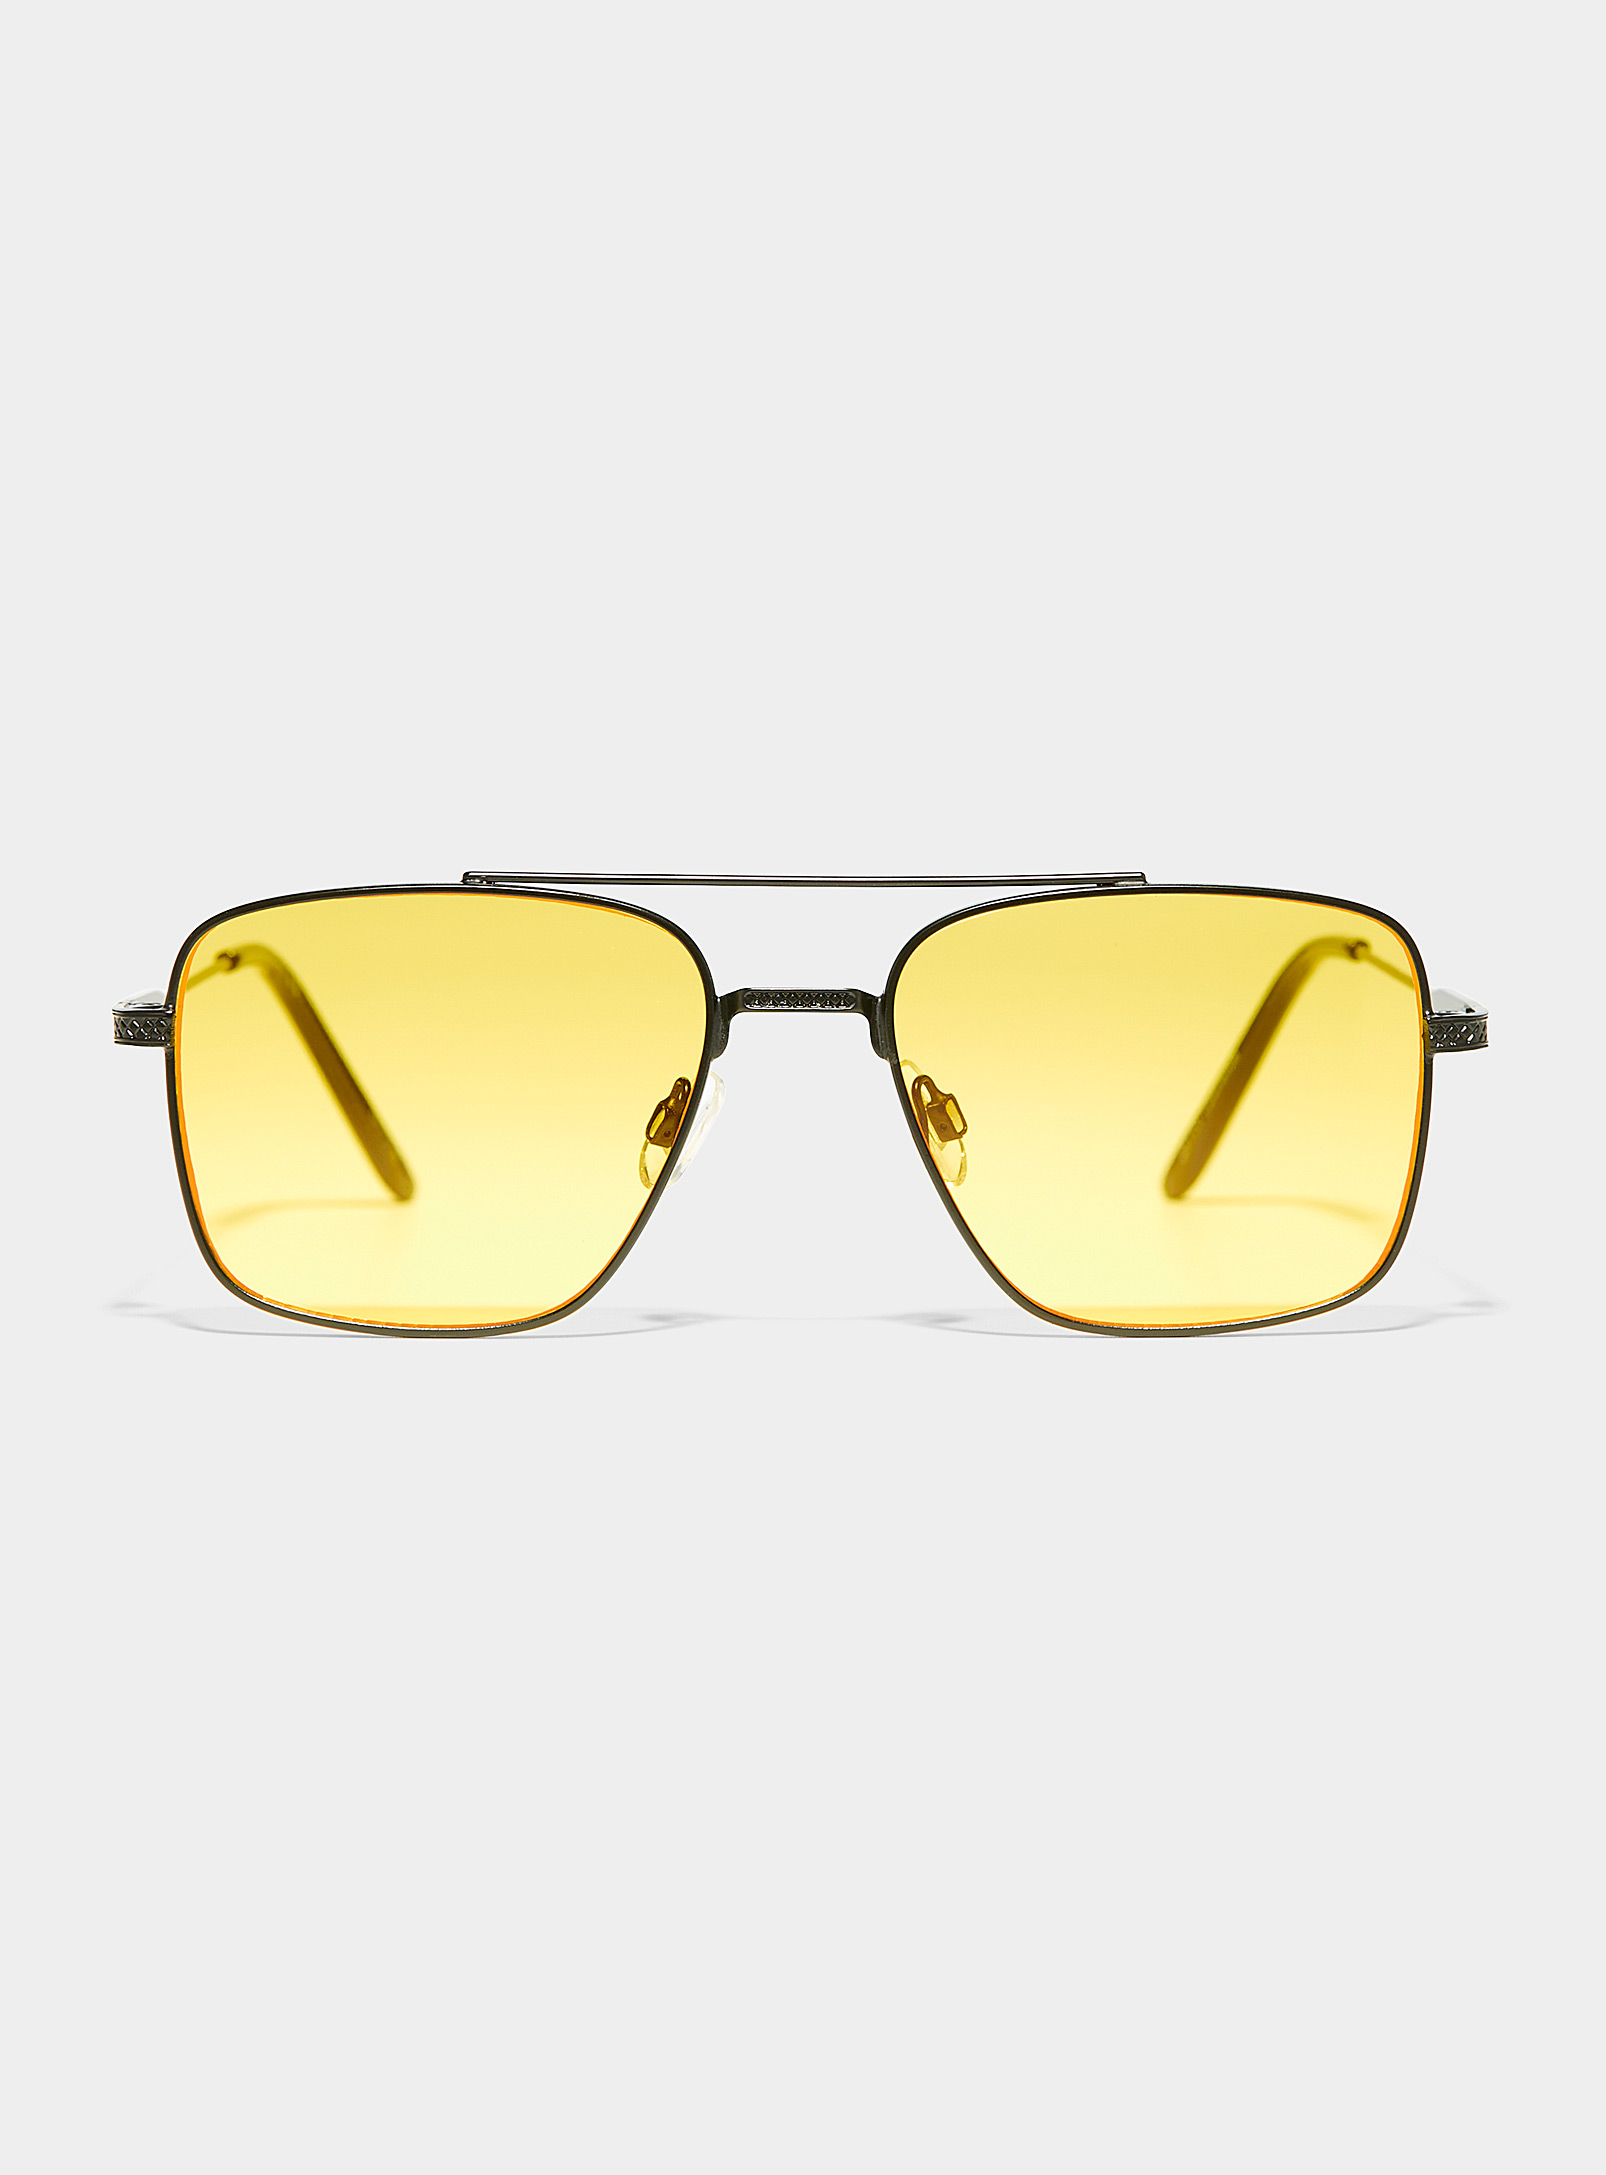 Le 31 Lawrence Aviator Sunglasses In Yellow